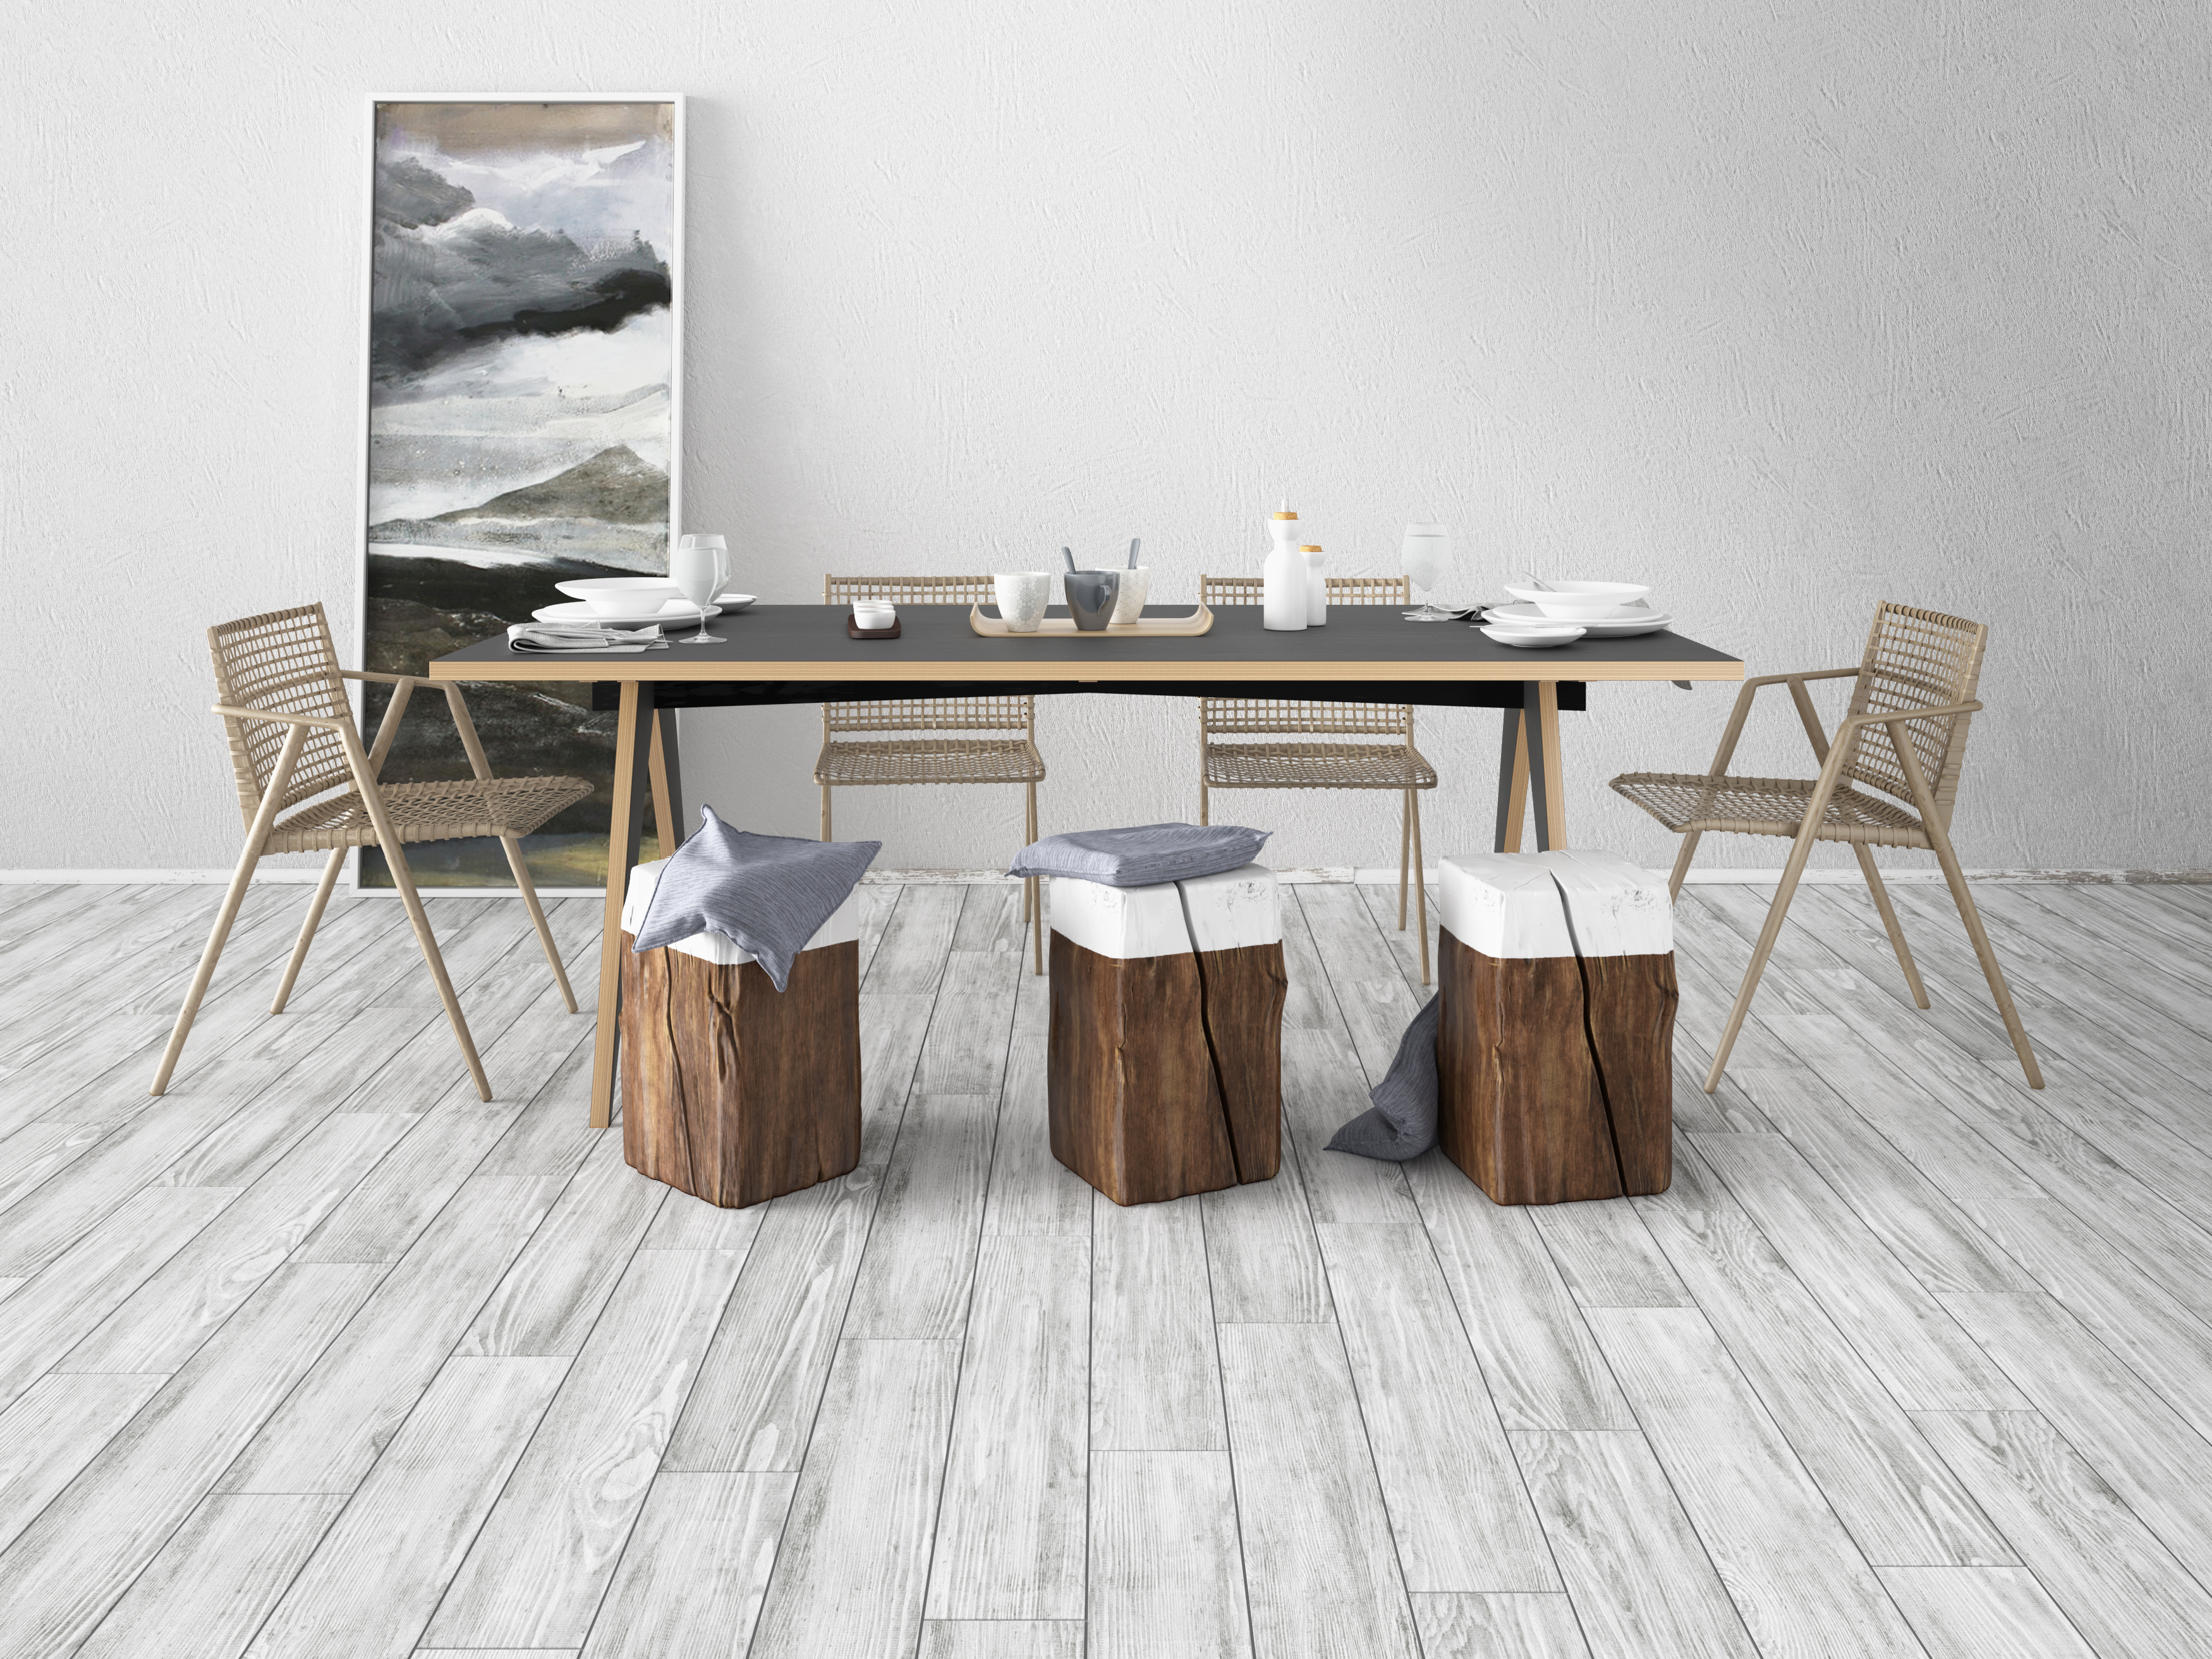 Wood-look tile floor in white-washed, light oak color featuring a dining room table, chairs, and wall art